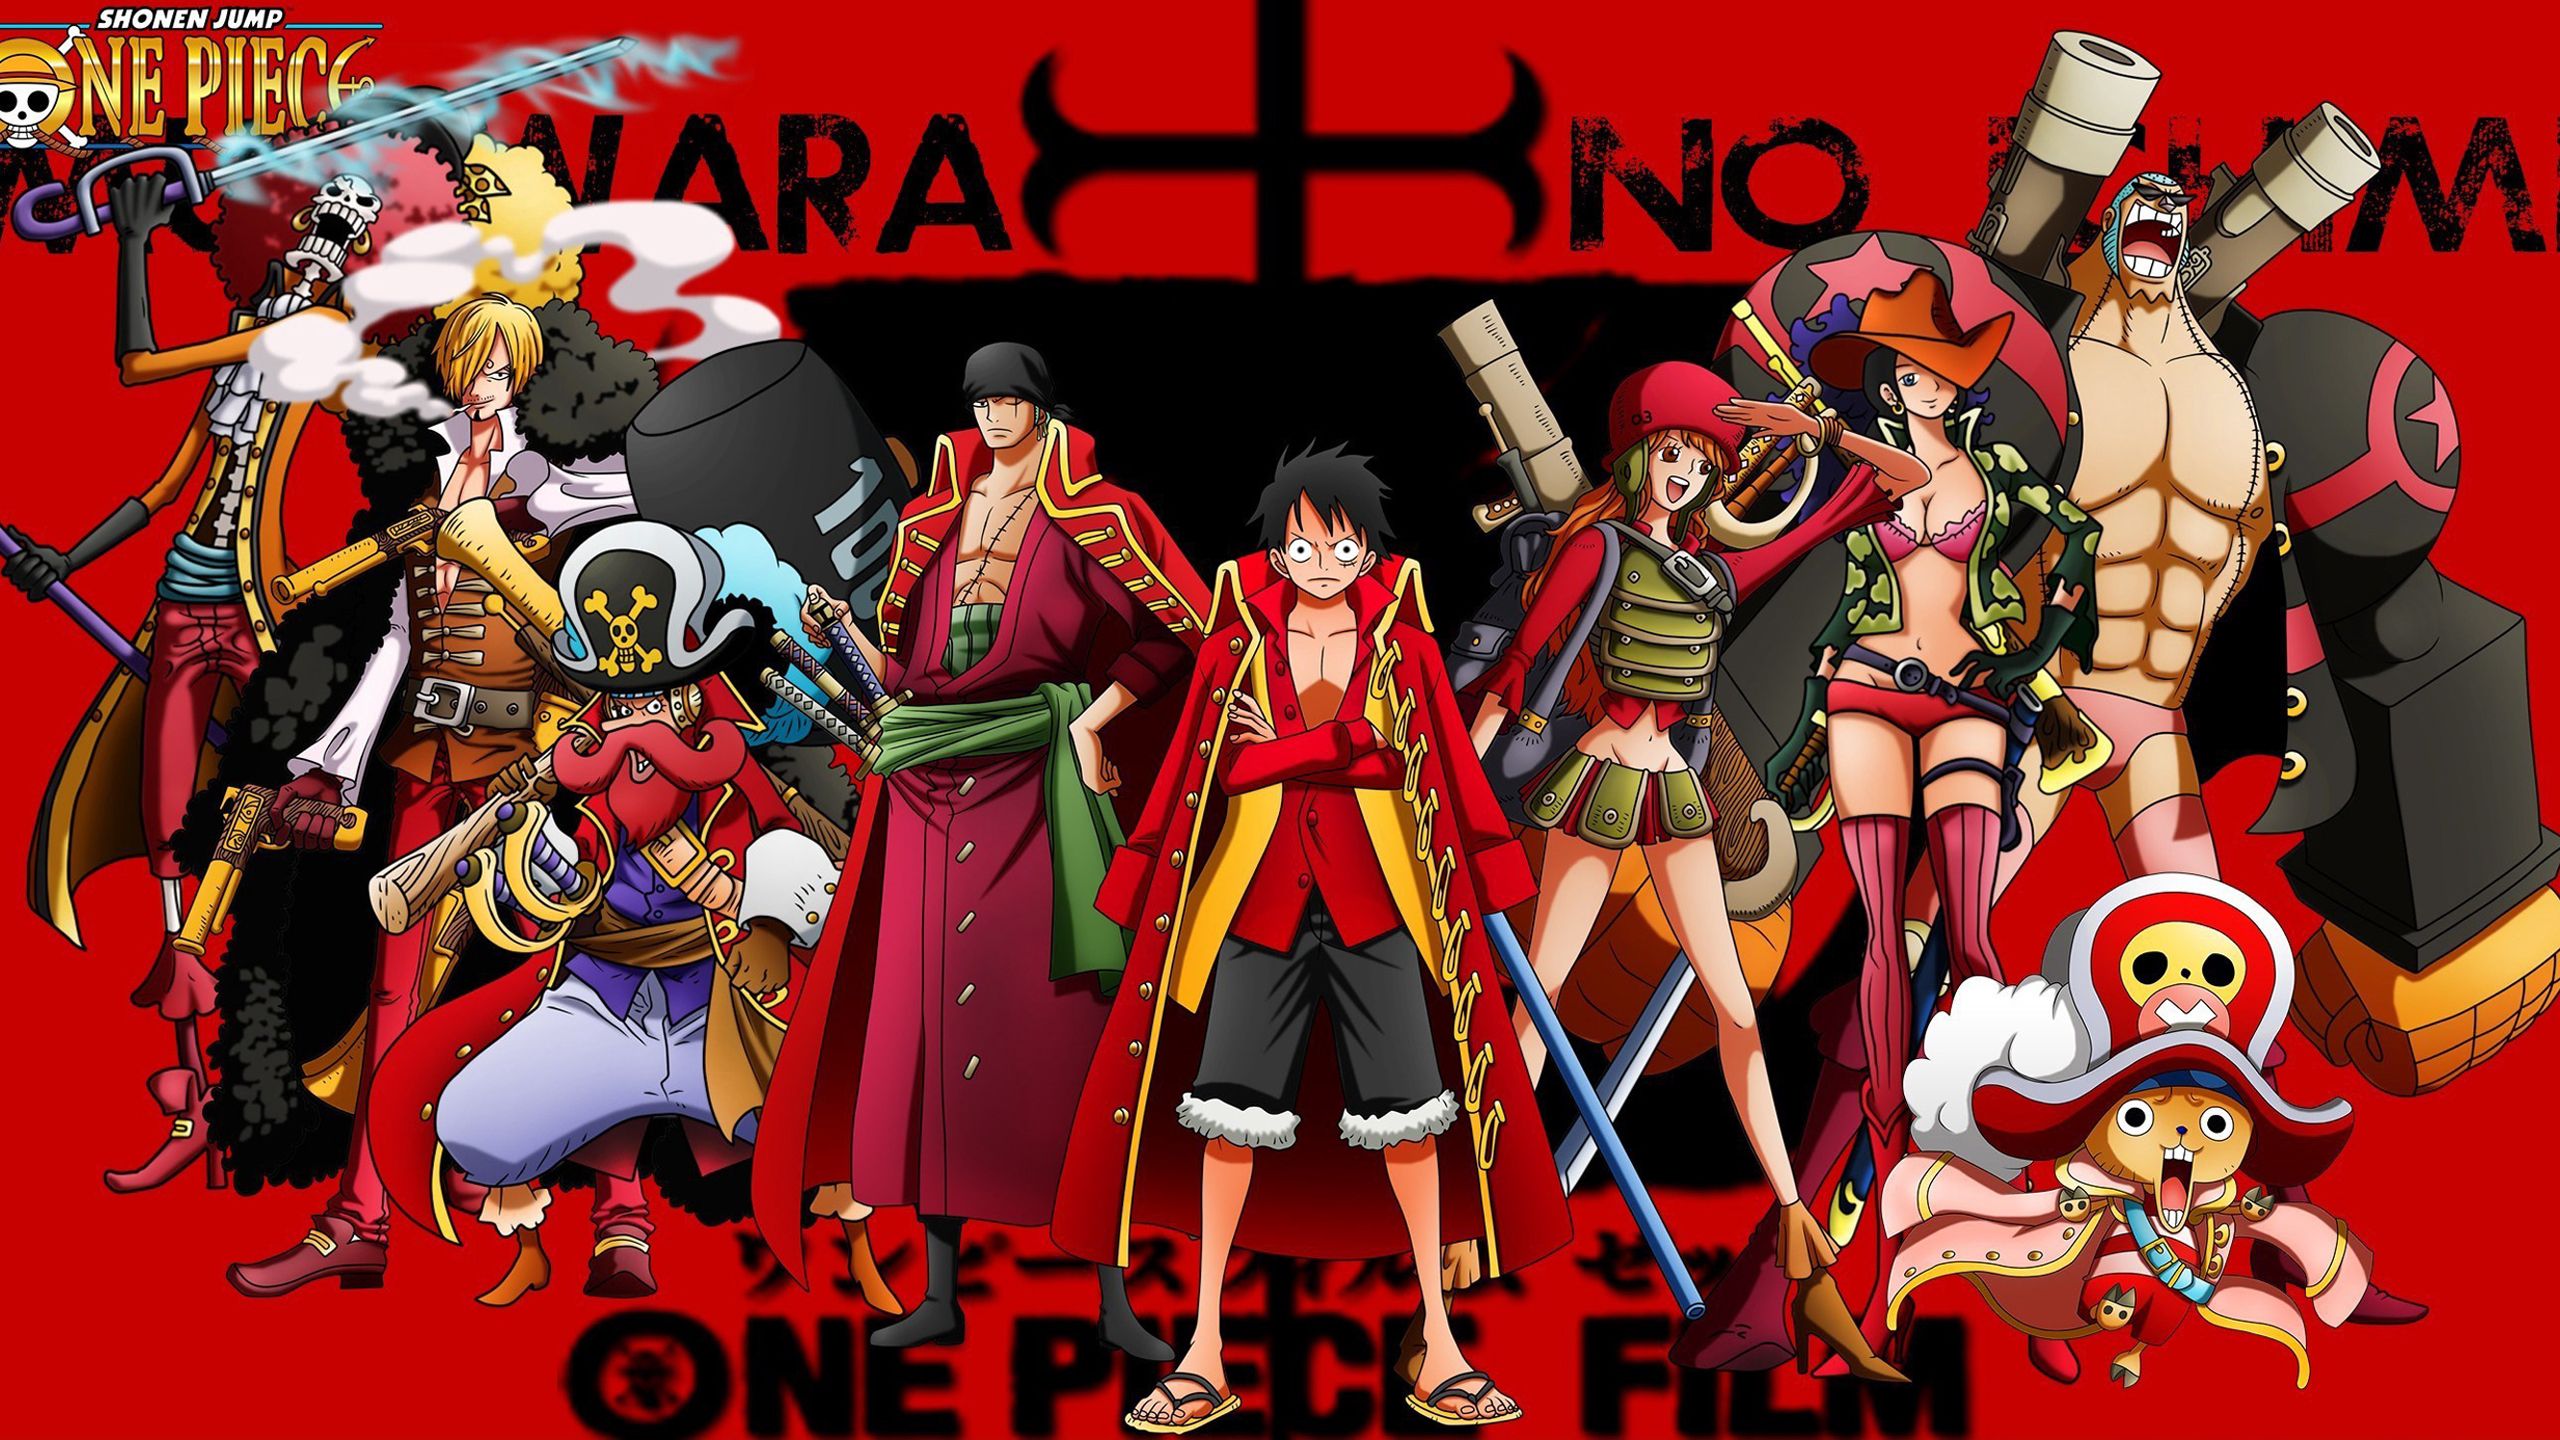 One Piece Charaters Of One Piece With Red Background HD Anime Wallpaper